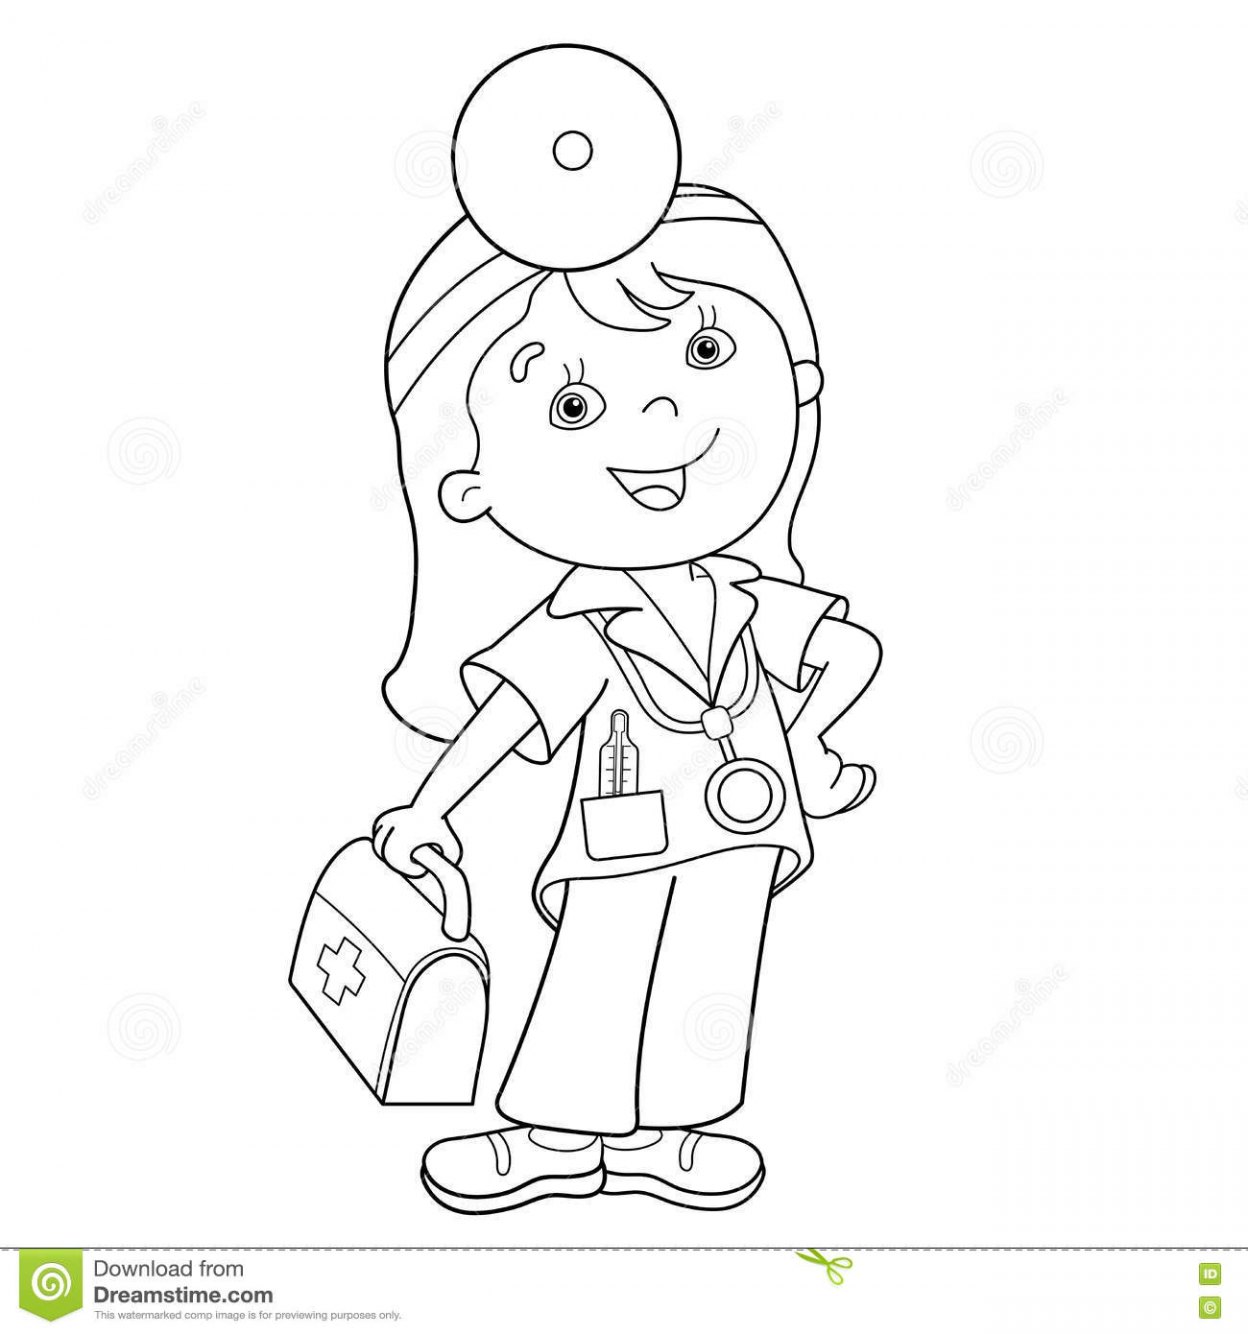 Learn All About Child Outline Coloring Page From This